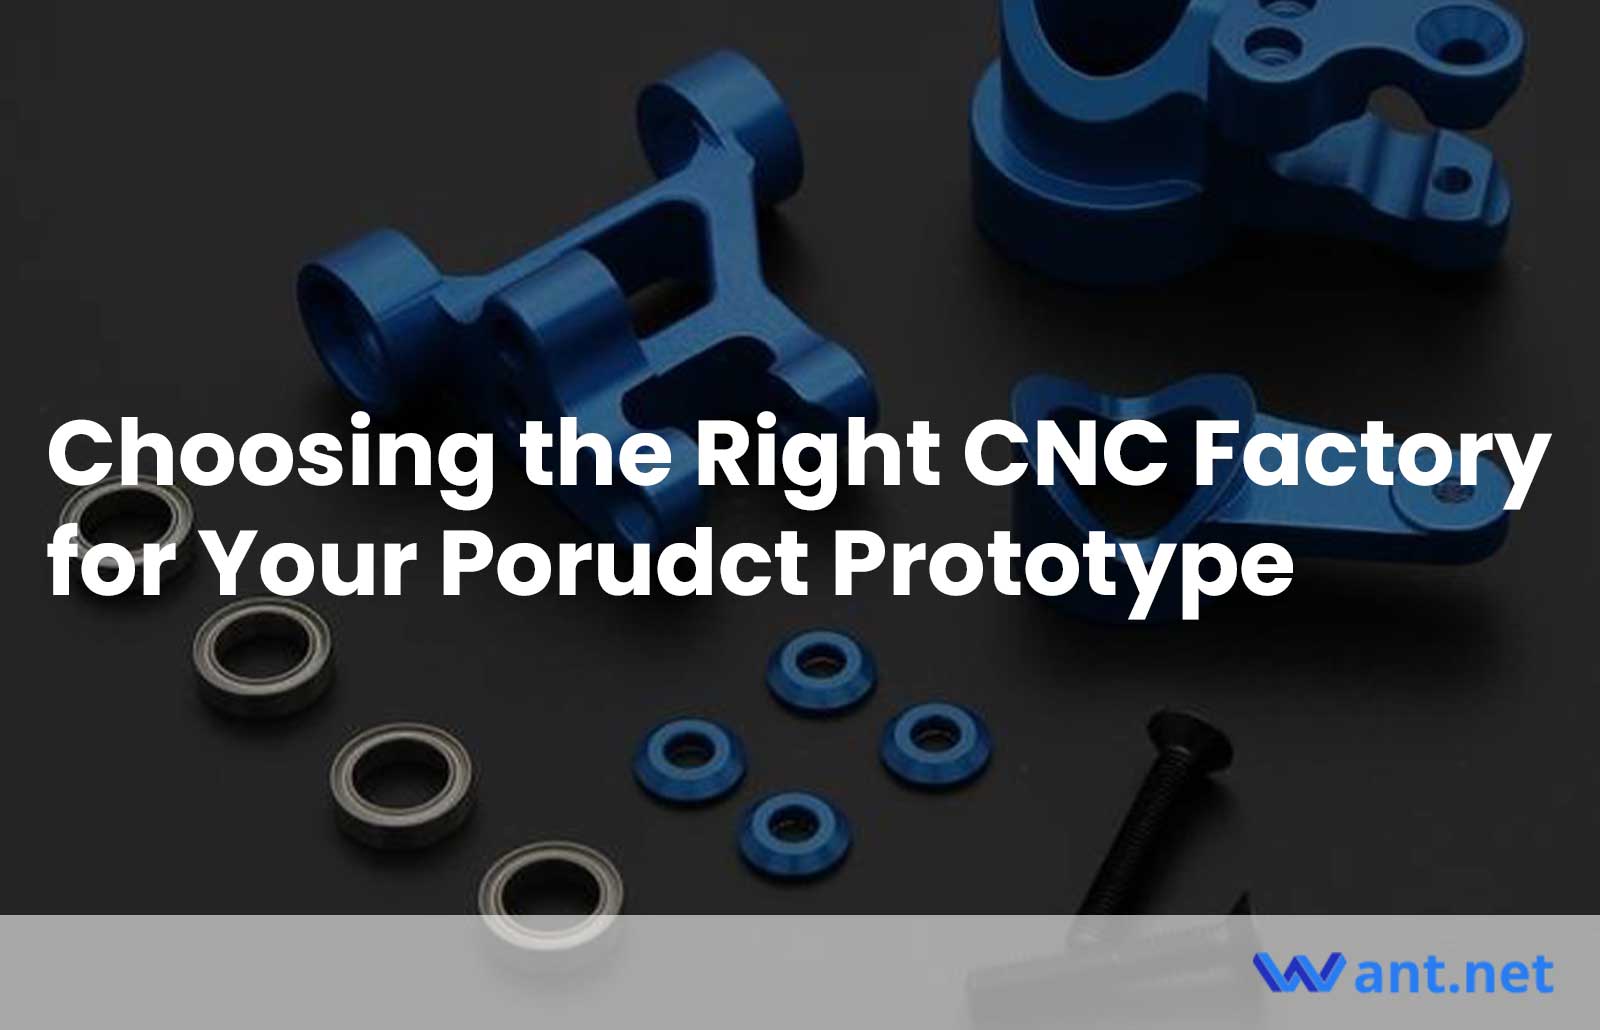 Choosing the Right CNC Factory for Your Porudct Prototype